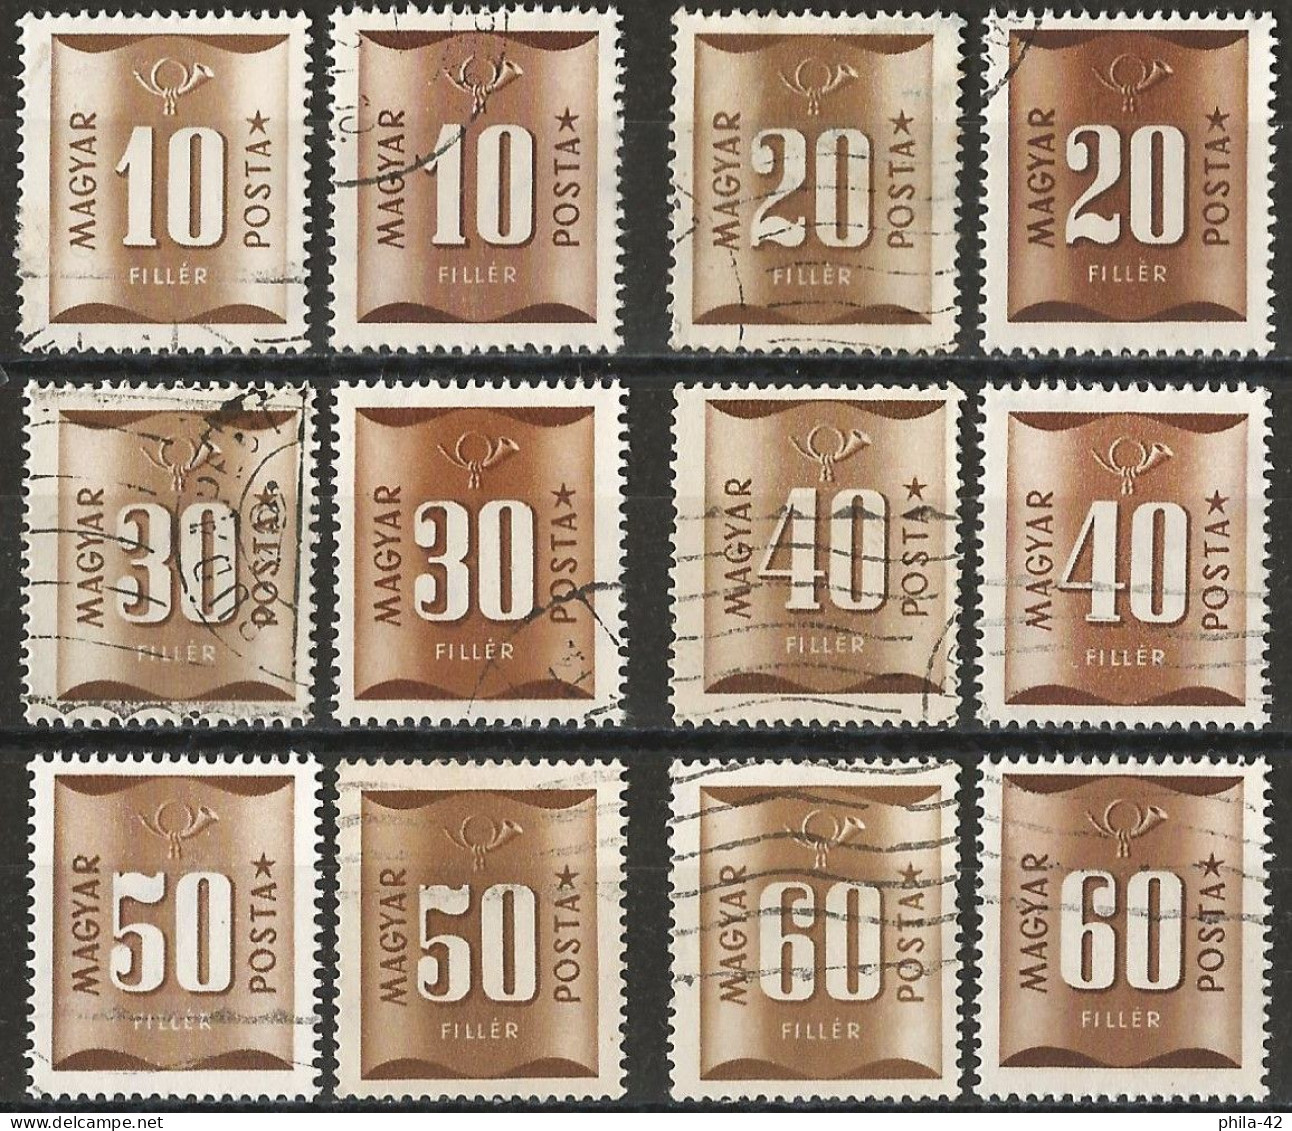 Hungary 1951 - Mi P194... - YT T188... ( Postage Due ) Shades Of Color - Errors, Freaks & Oddities (EFO)